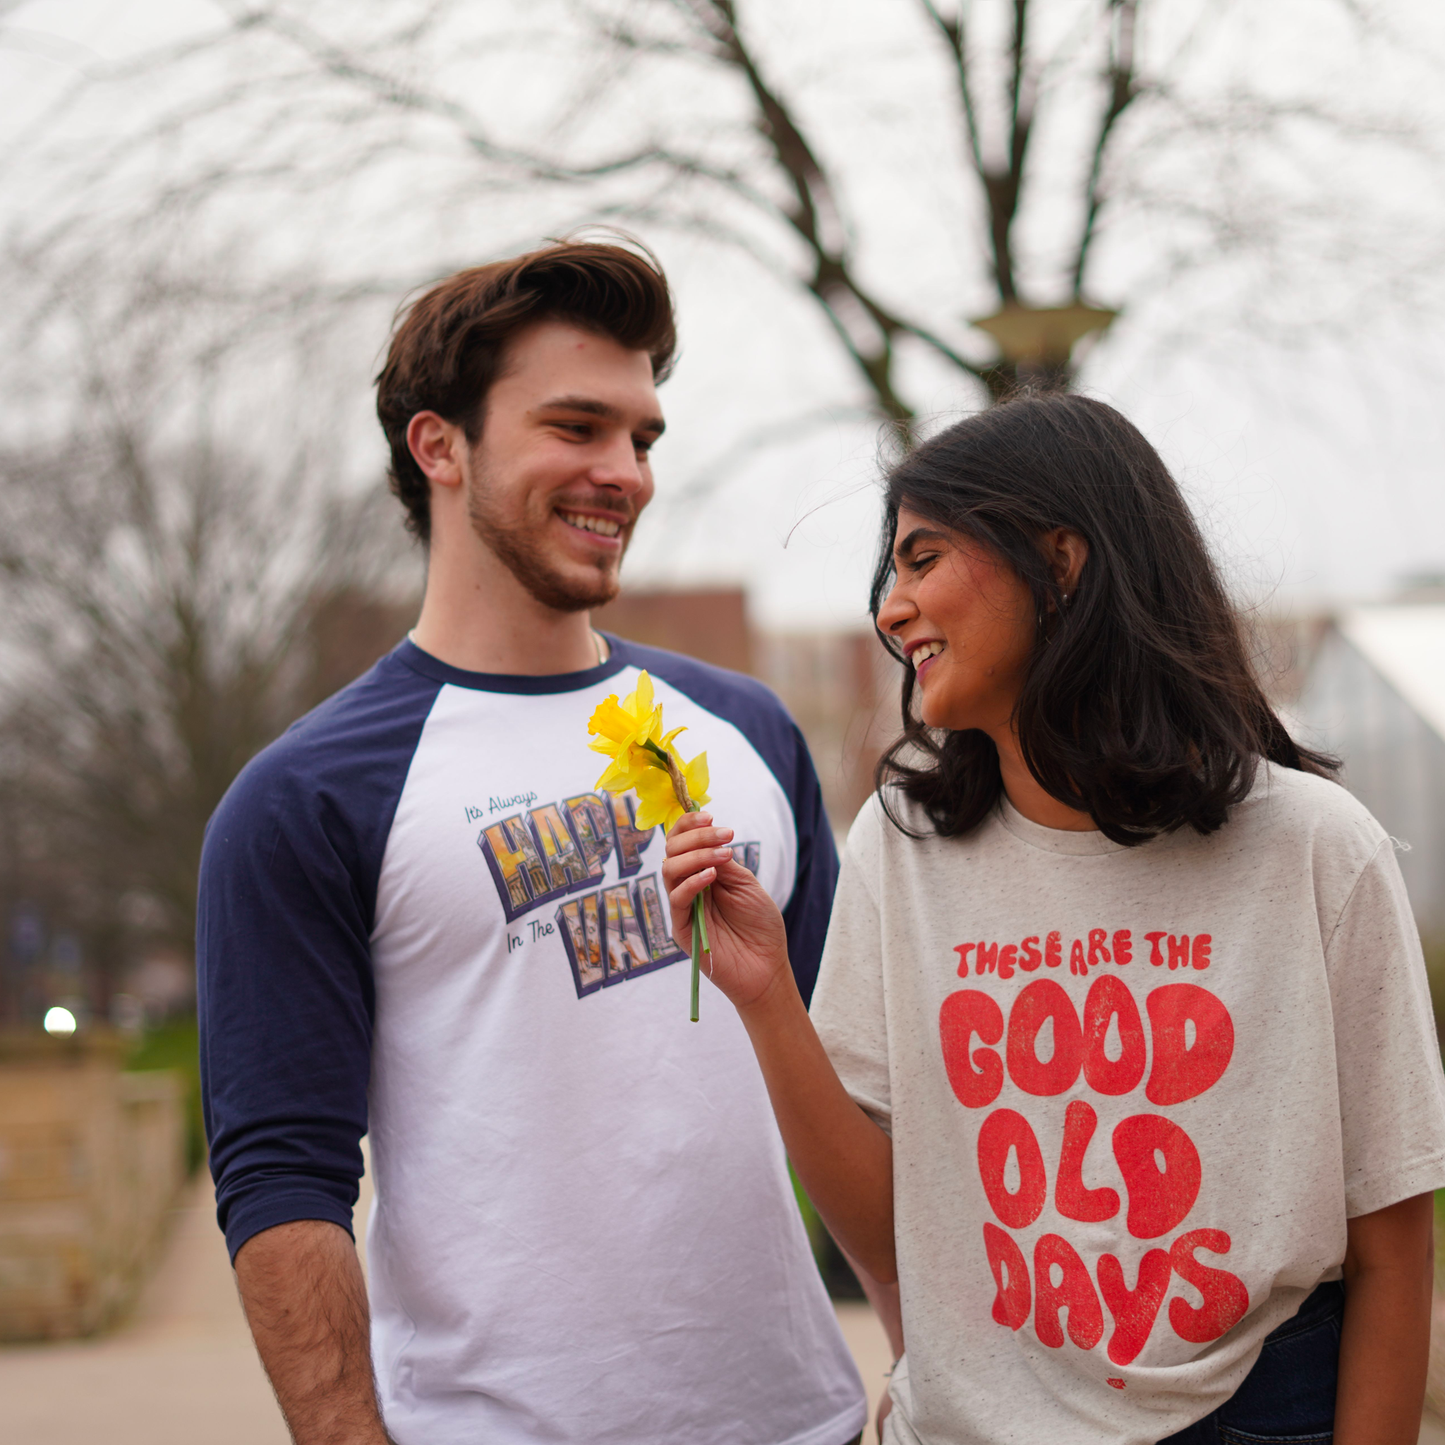 These Are the Good Old Days T-Shirt